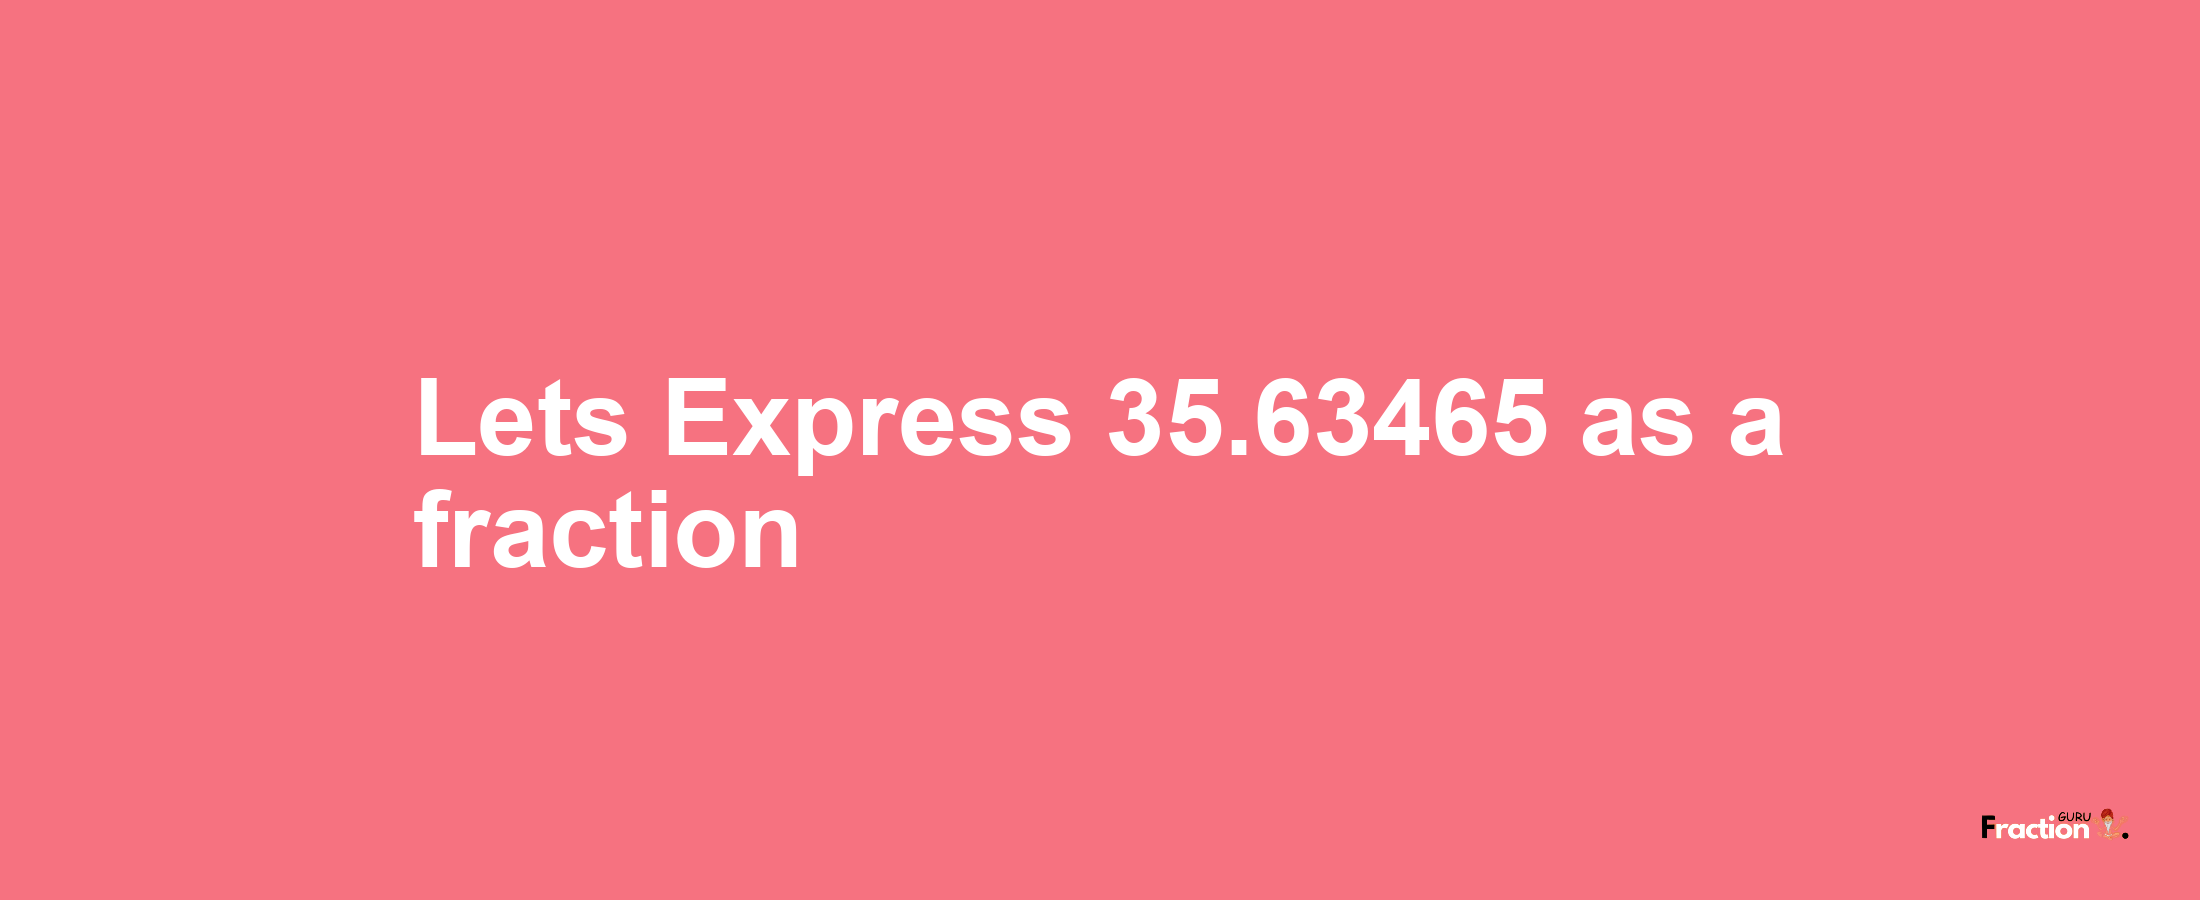 Lets Express 35.63465 as afraction